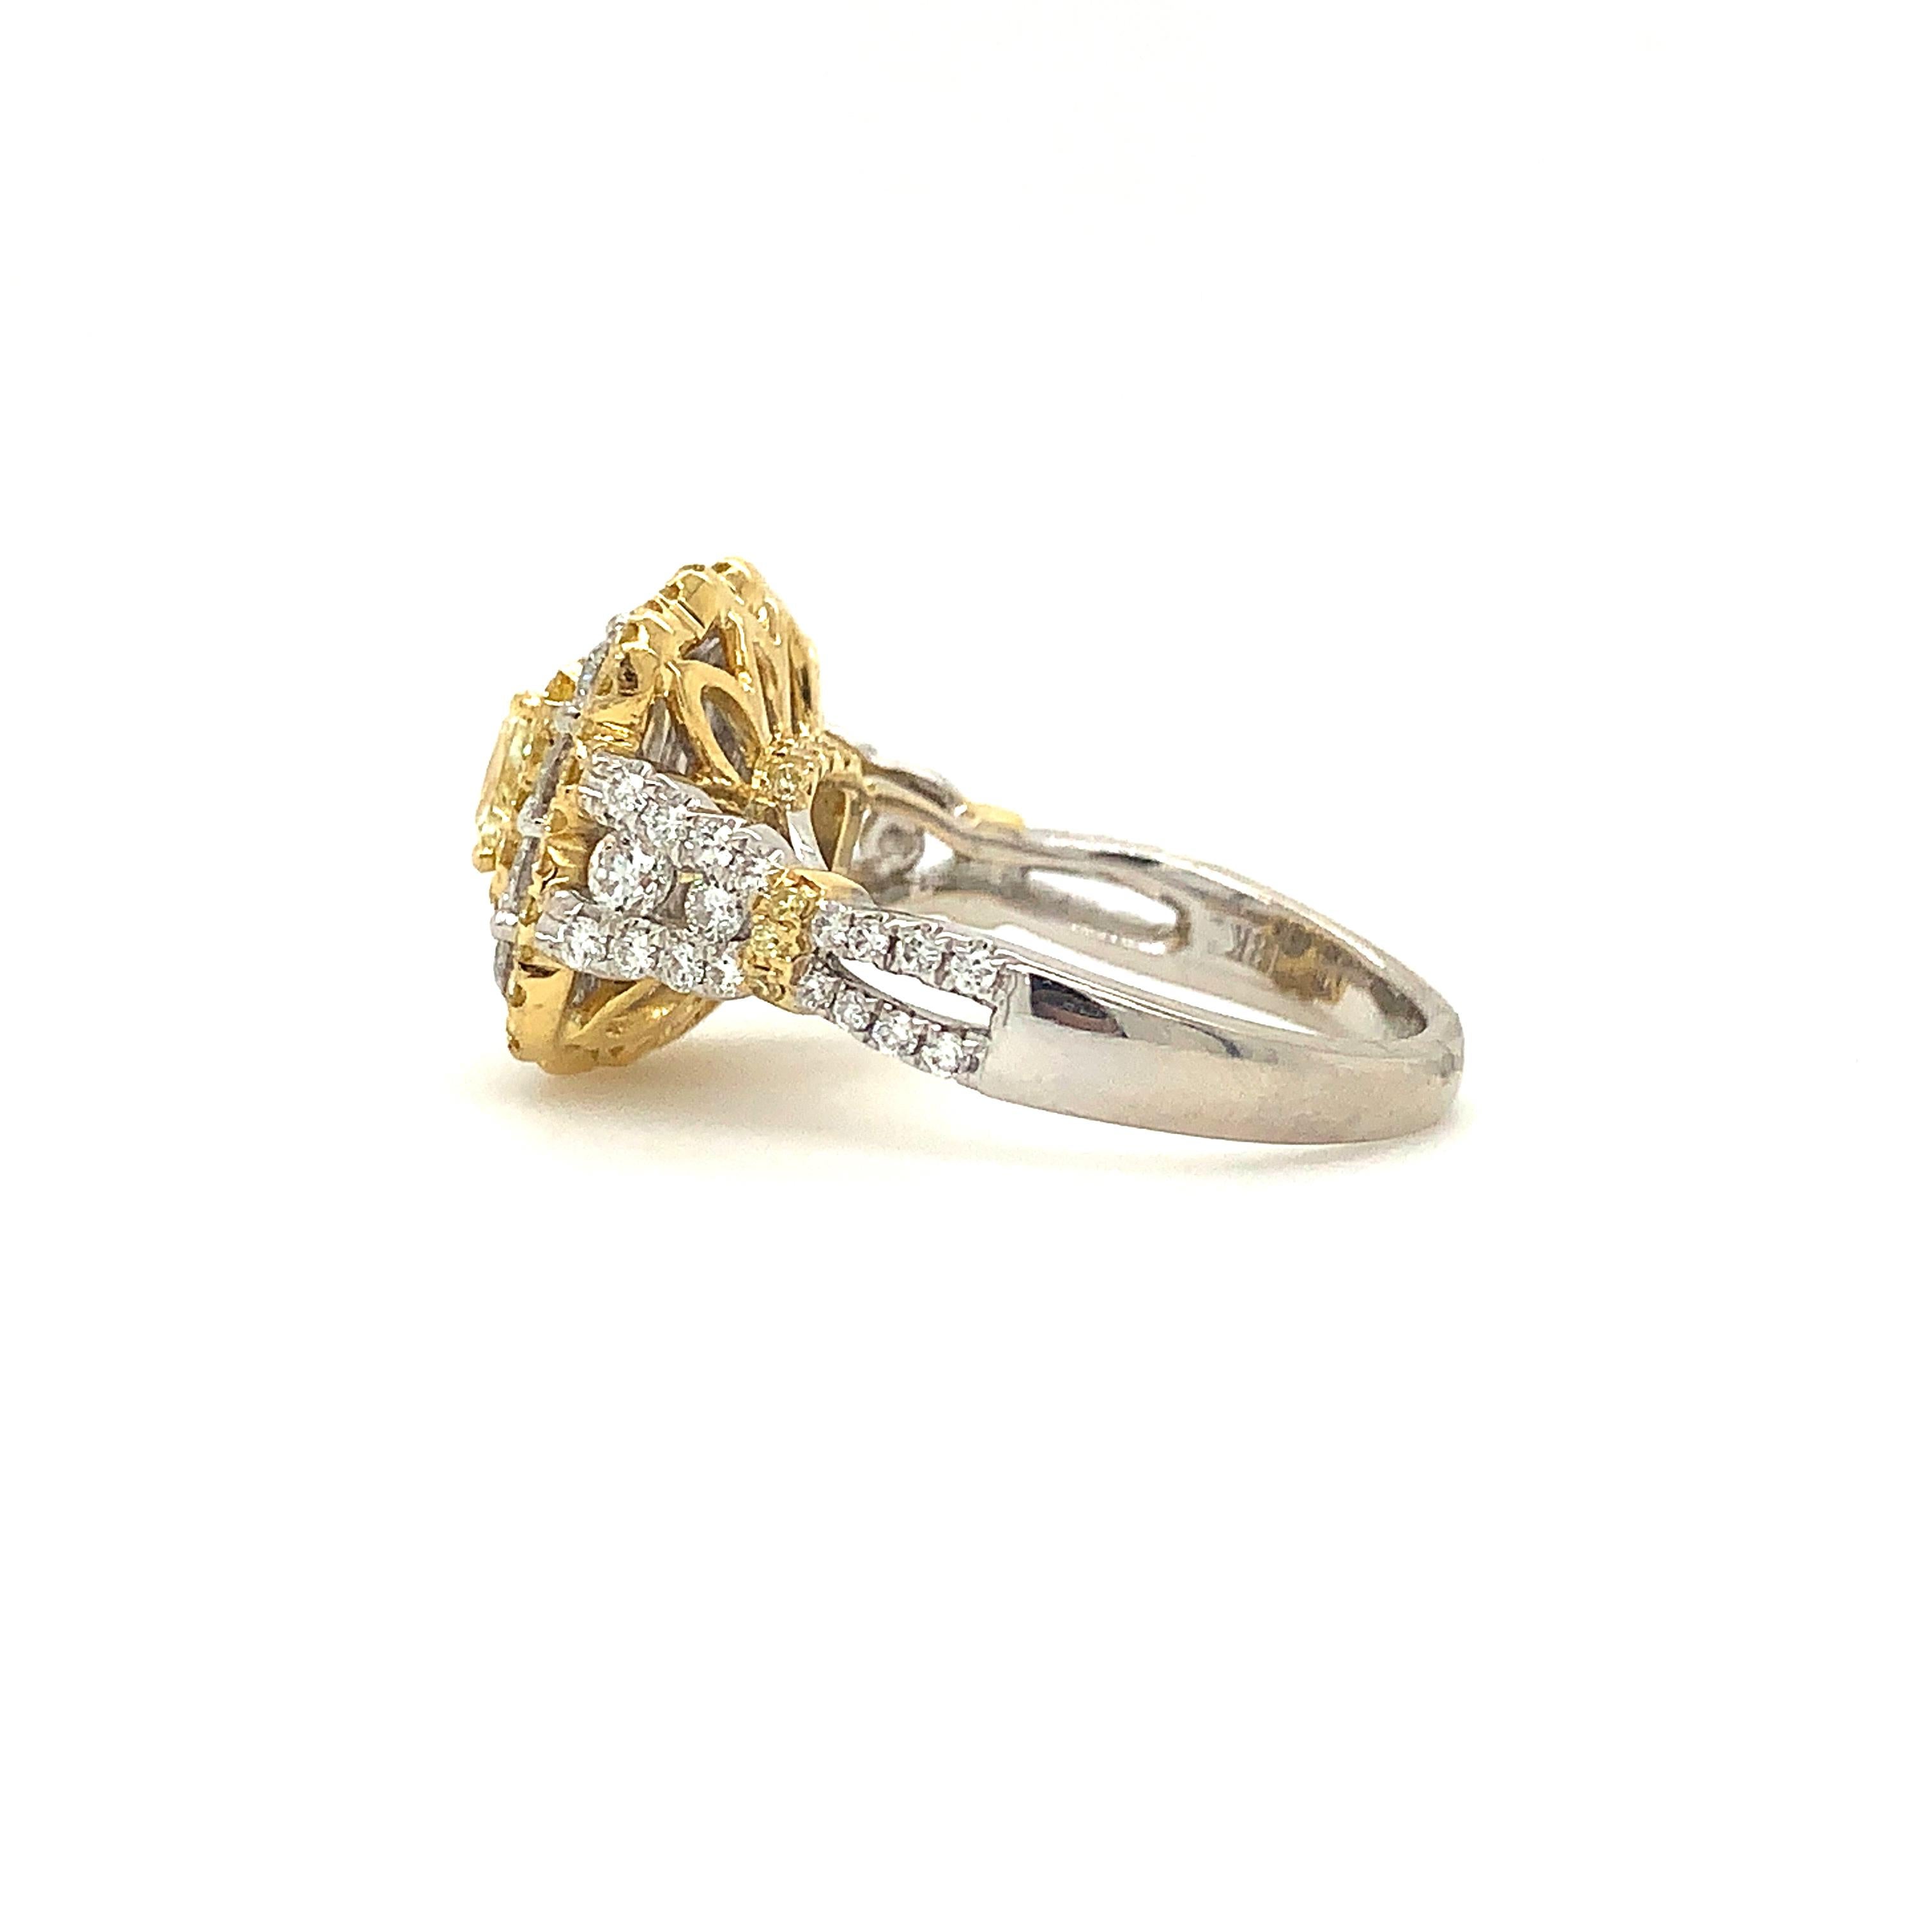 Brilliant Cut Roman + Jules Fancy Intense Yellow and White Fine Quality Diamond Ring in 18kt For Sale